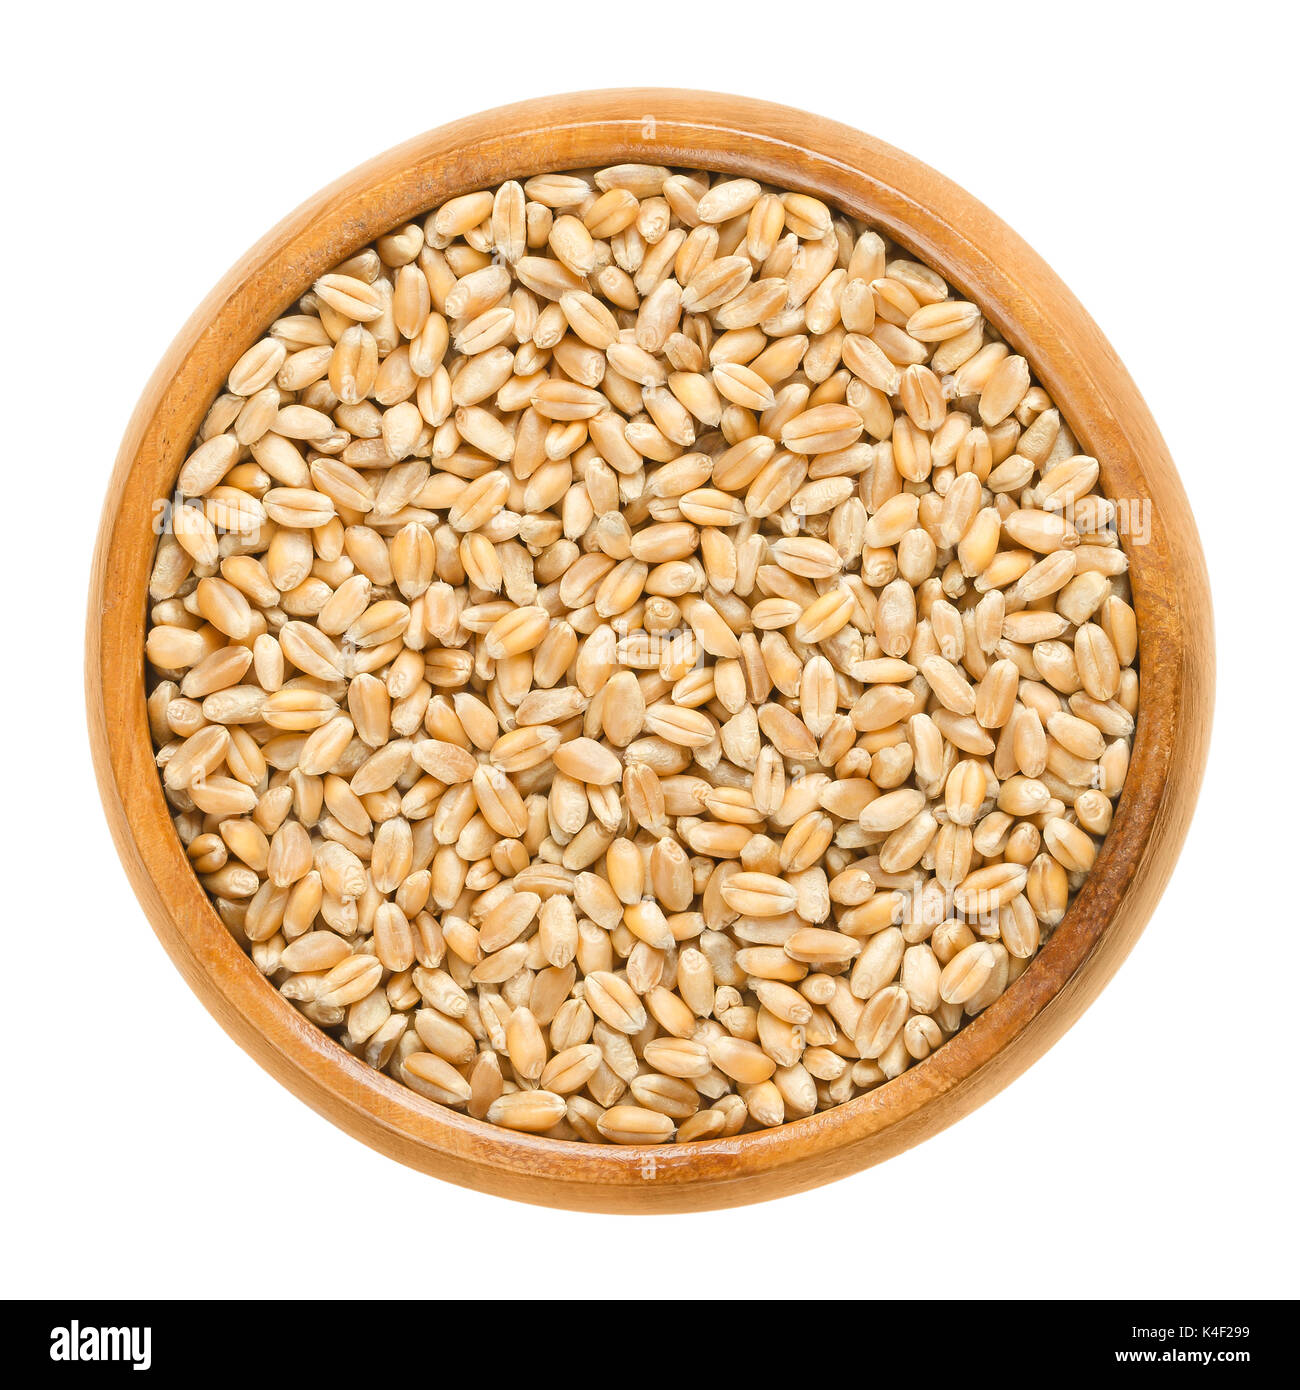 Common wheat in wooden bowl. Bread wheat. Crop, cereal grain and staple food. Seeds of Triticum aestivum. Isolated macro food photo close up. Stock Photo